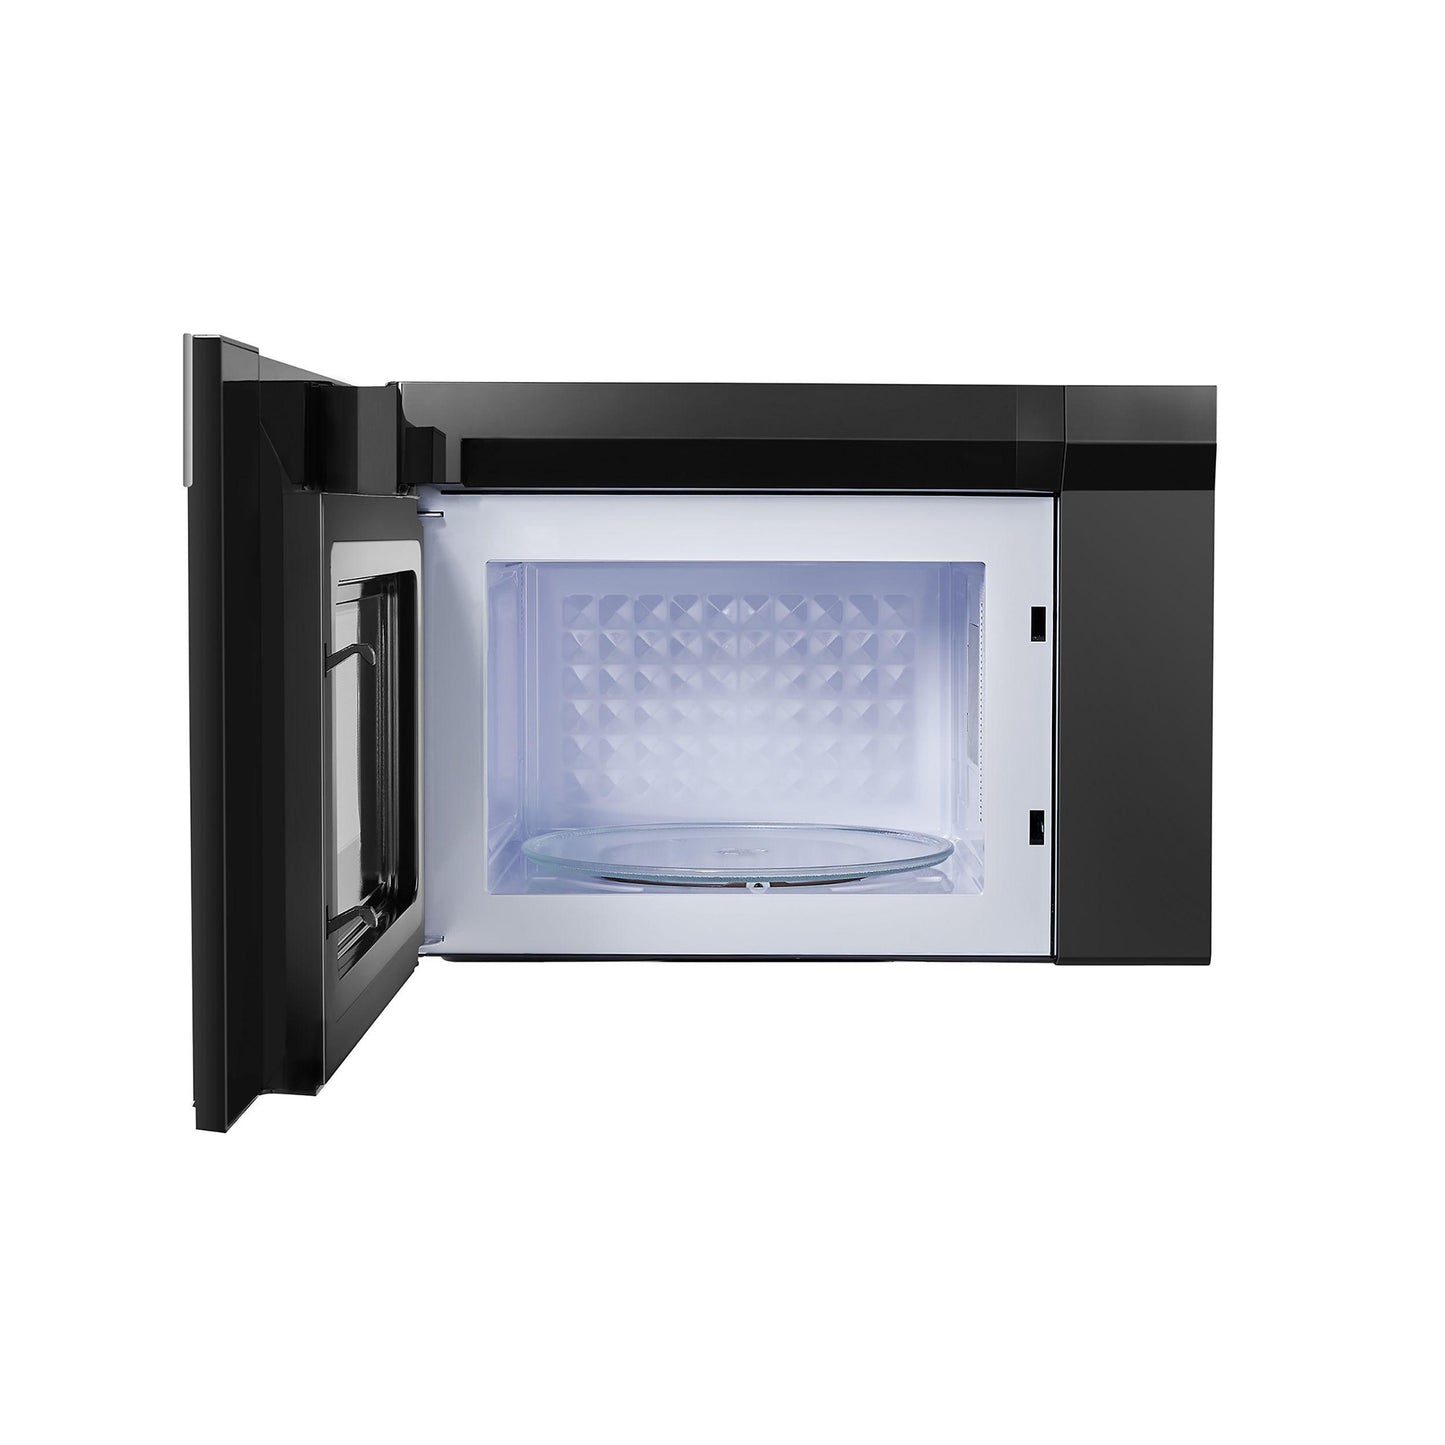 Forno FOTR307924 Forno Capriolo 24" Otr Stainless Steel Microwave Oven 1.3 Cu.Ft.